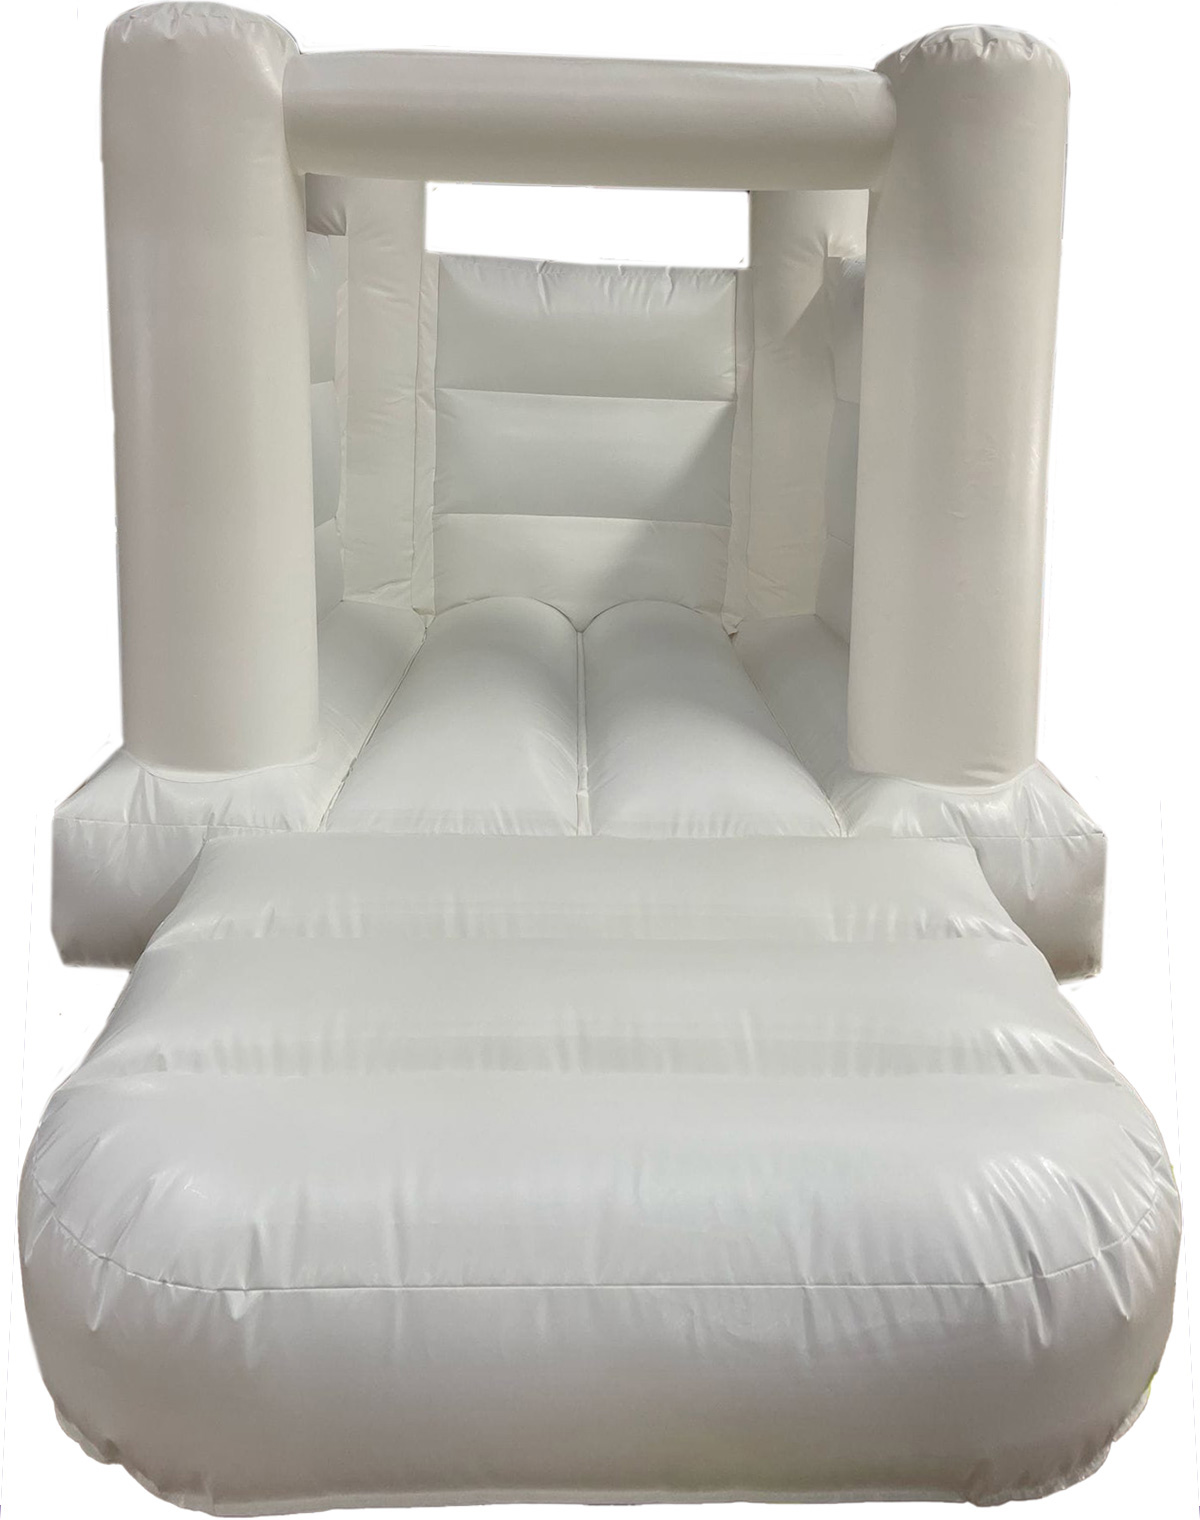 Bouncy Castle Sales - BC712 - Bouncy Inflatable for sale